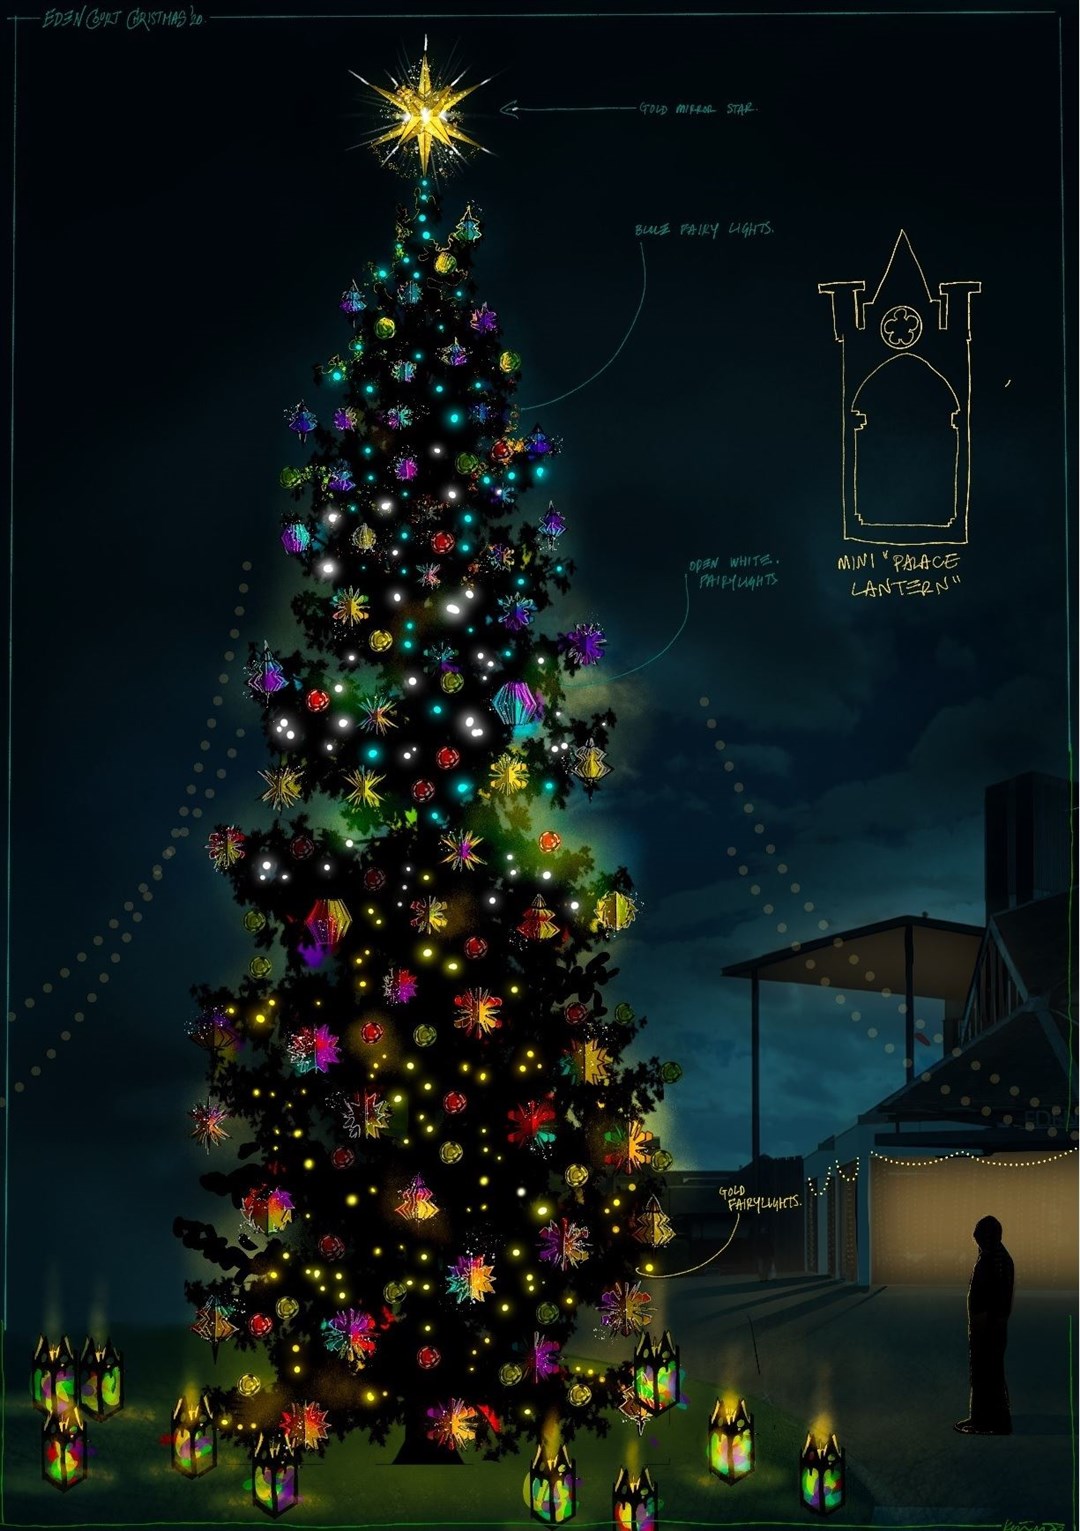 An artist's impression of the tree.